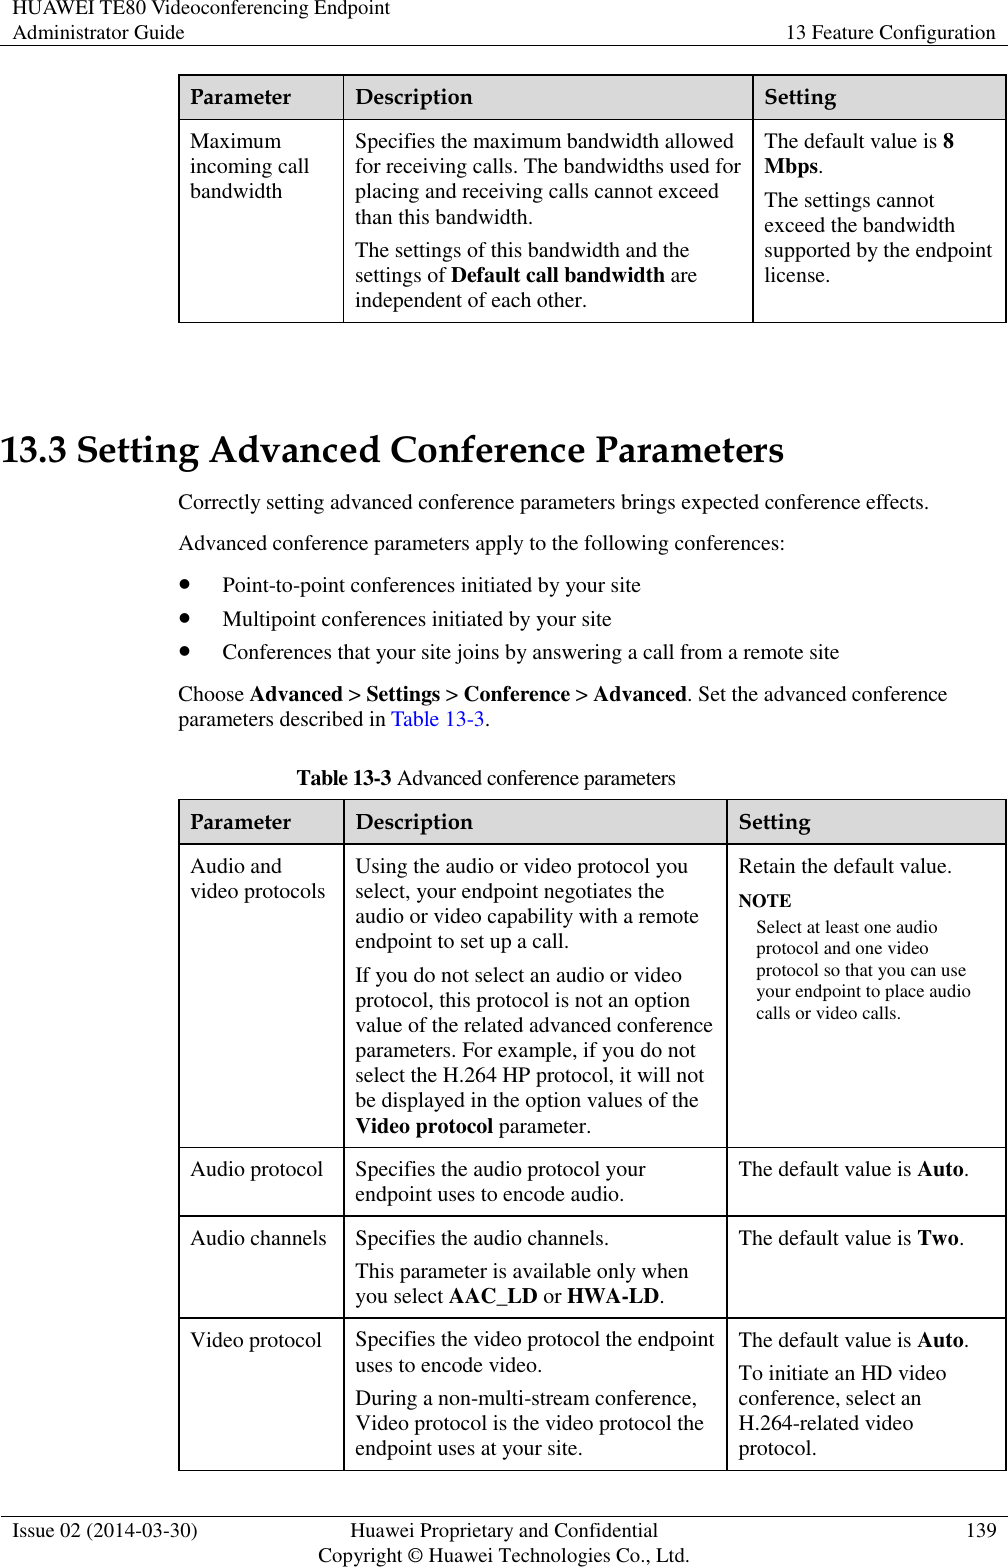 HUAWEI TE80 Videoconferencing Endpoint Administrator Guide 13 Feature Configuration  Issue 02 (2014-03-30) Huawei Proprietary and Confidential Copyright © Huawei Technologies Co., Ltd. 139  Parameter Description Setting Maximum incoming call bandwidth Specifies the maximum bandwidth allowed for receiving calls. The bandwidths used for placing and receiving calls cannot exceed than this bandwidth.   The settings of this bandwidth and the settings of Default call bandwidth are independent of each other. The default value is 8 Mbps. The settings cannot exceed the bandwidth supported by the endpoint license.  13.3 Setting Advanced Conference Parameters Correctly setting advanced conference parameters brings expected conference effects. Advanced conference parameters apply to the following conferences:  Point-to-point conferences initiated by your site  Multipoint conferences initiated by your site  Conferences that your site joins by answering a call from a remote site Choose Advanced &gt; Settings &gt; Conference &gt; Advanced. Set the advanced conference parameters described in Table 13-3. Table 13-3 Advanced conference parameters Parameter Description Setting Audio and video protocols Using the audio or video protocol you select, your endpoint negotiates the audio or video capability with a remote endpoint to set up a call. If you do not select an audio or video protocol, this protocol is not an option value of the related advanced conference parameters. For example, if you do not select the H.264 HP protocol, it will not be displayed in the option values of the Video protocol parameter. Retain the default value. NOTE Select at least one audio protocol and one video protocol so that you can use your endpoint to place audio calls or video calls. Audio protocol Specifies the audio protocol your endpoint uses to encode audio. The default value is Auto. Audio channels Specifies the audio channels. This parameter is available only when you select AAC_LD or HWA-LD. The default value is Two. Video protocol Specifies the video protocol the endpoint uses to encode video. During a non-multi-stream conference, Video protocol is the video protocol the endpoint uses at your site. The default value is Auto. To initiate an HD video conference, select an H.264-related video protocol. 